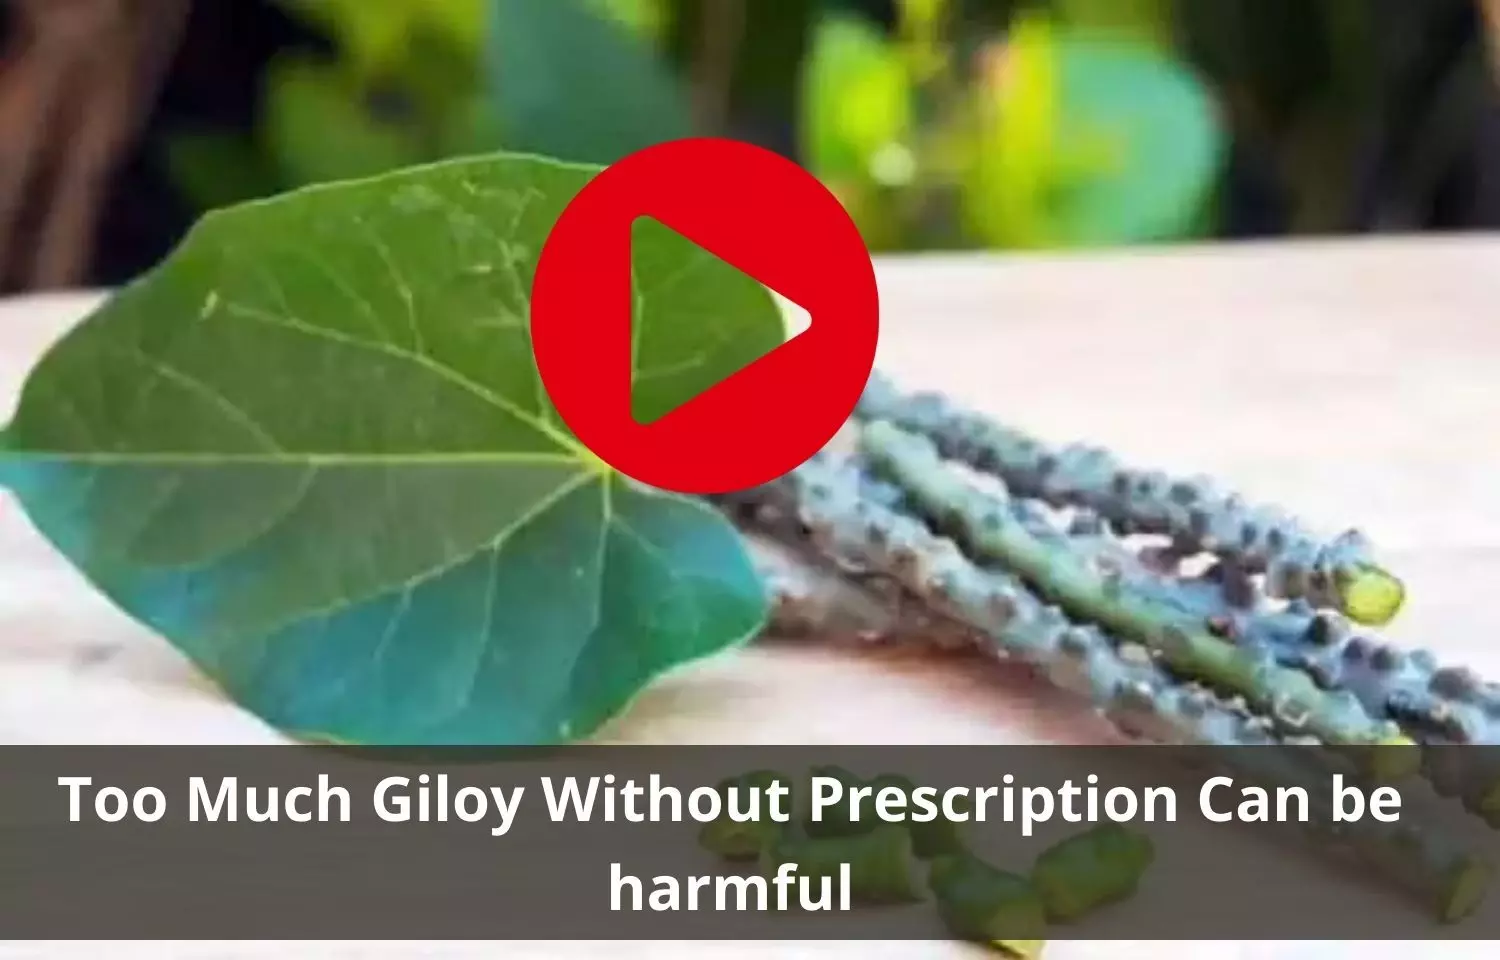 Giloy - An Immunity booster without prescription can be harmful